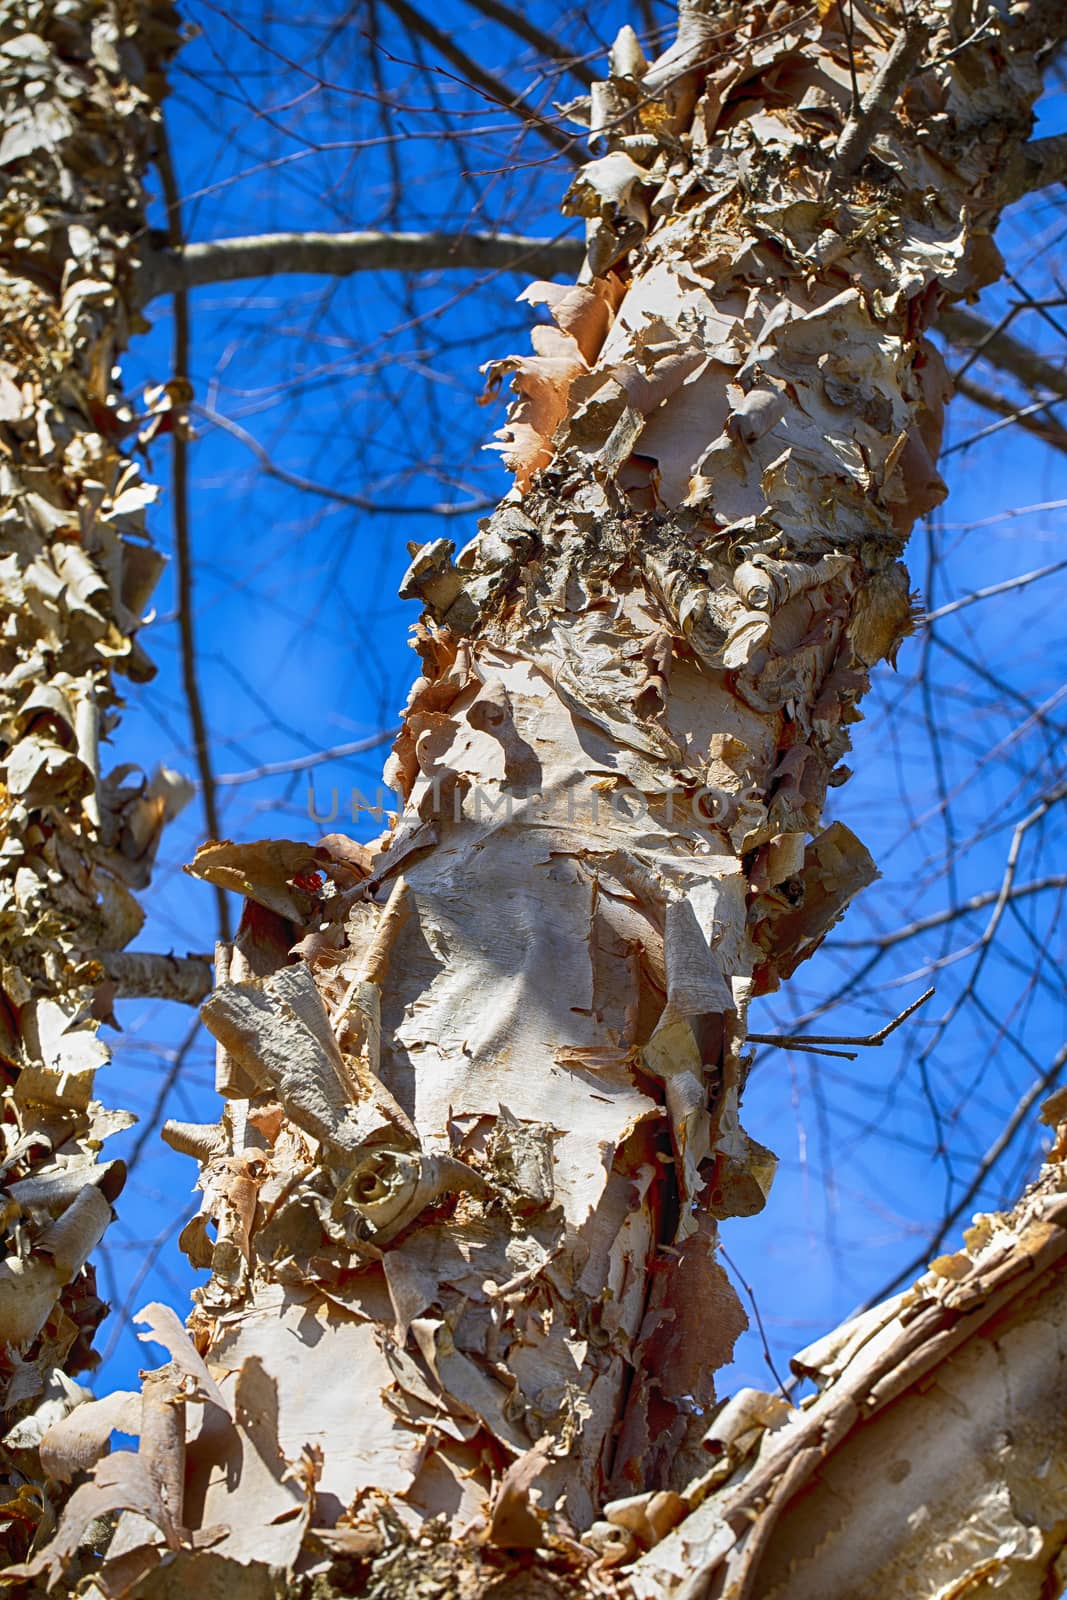 Paperbark Birch with Curling Bark by CharlieFloyd